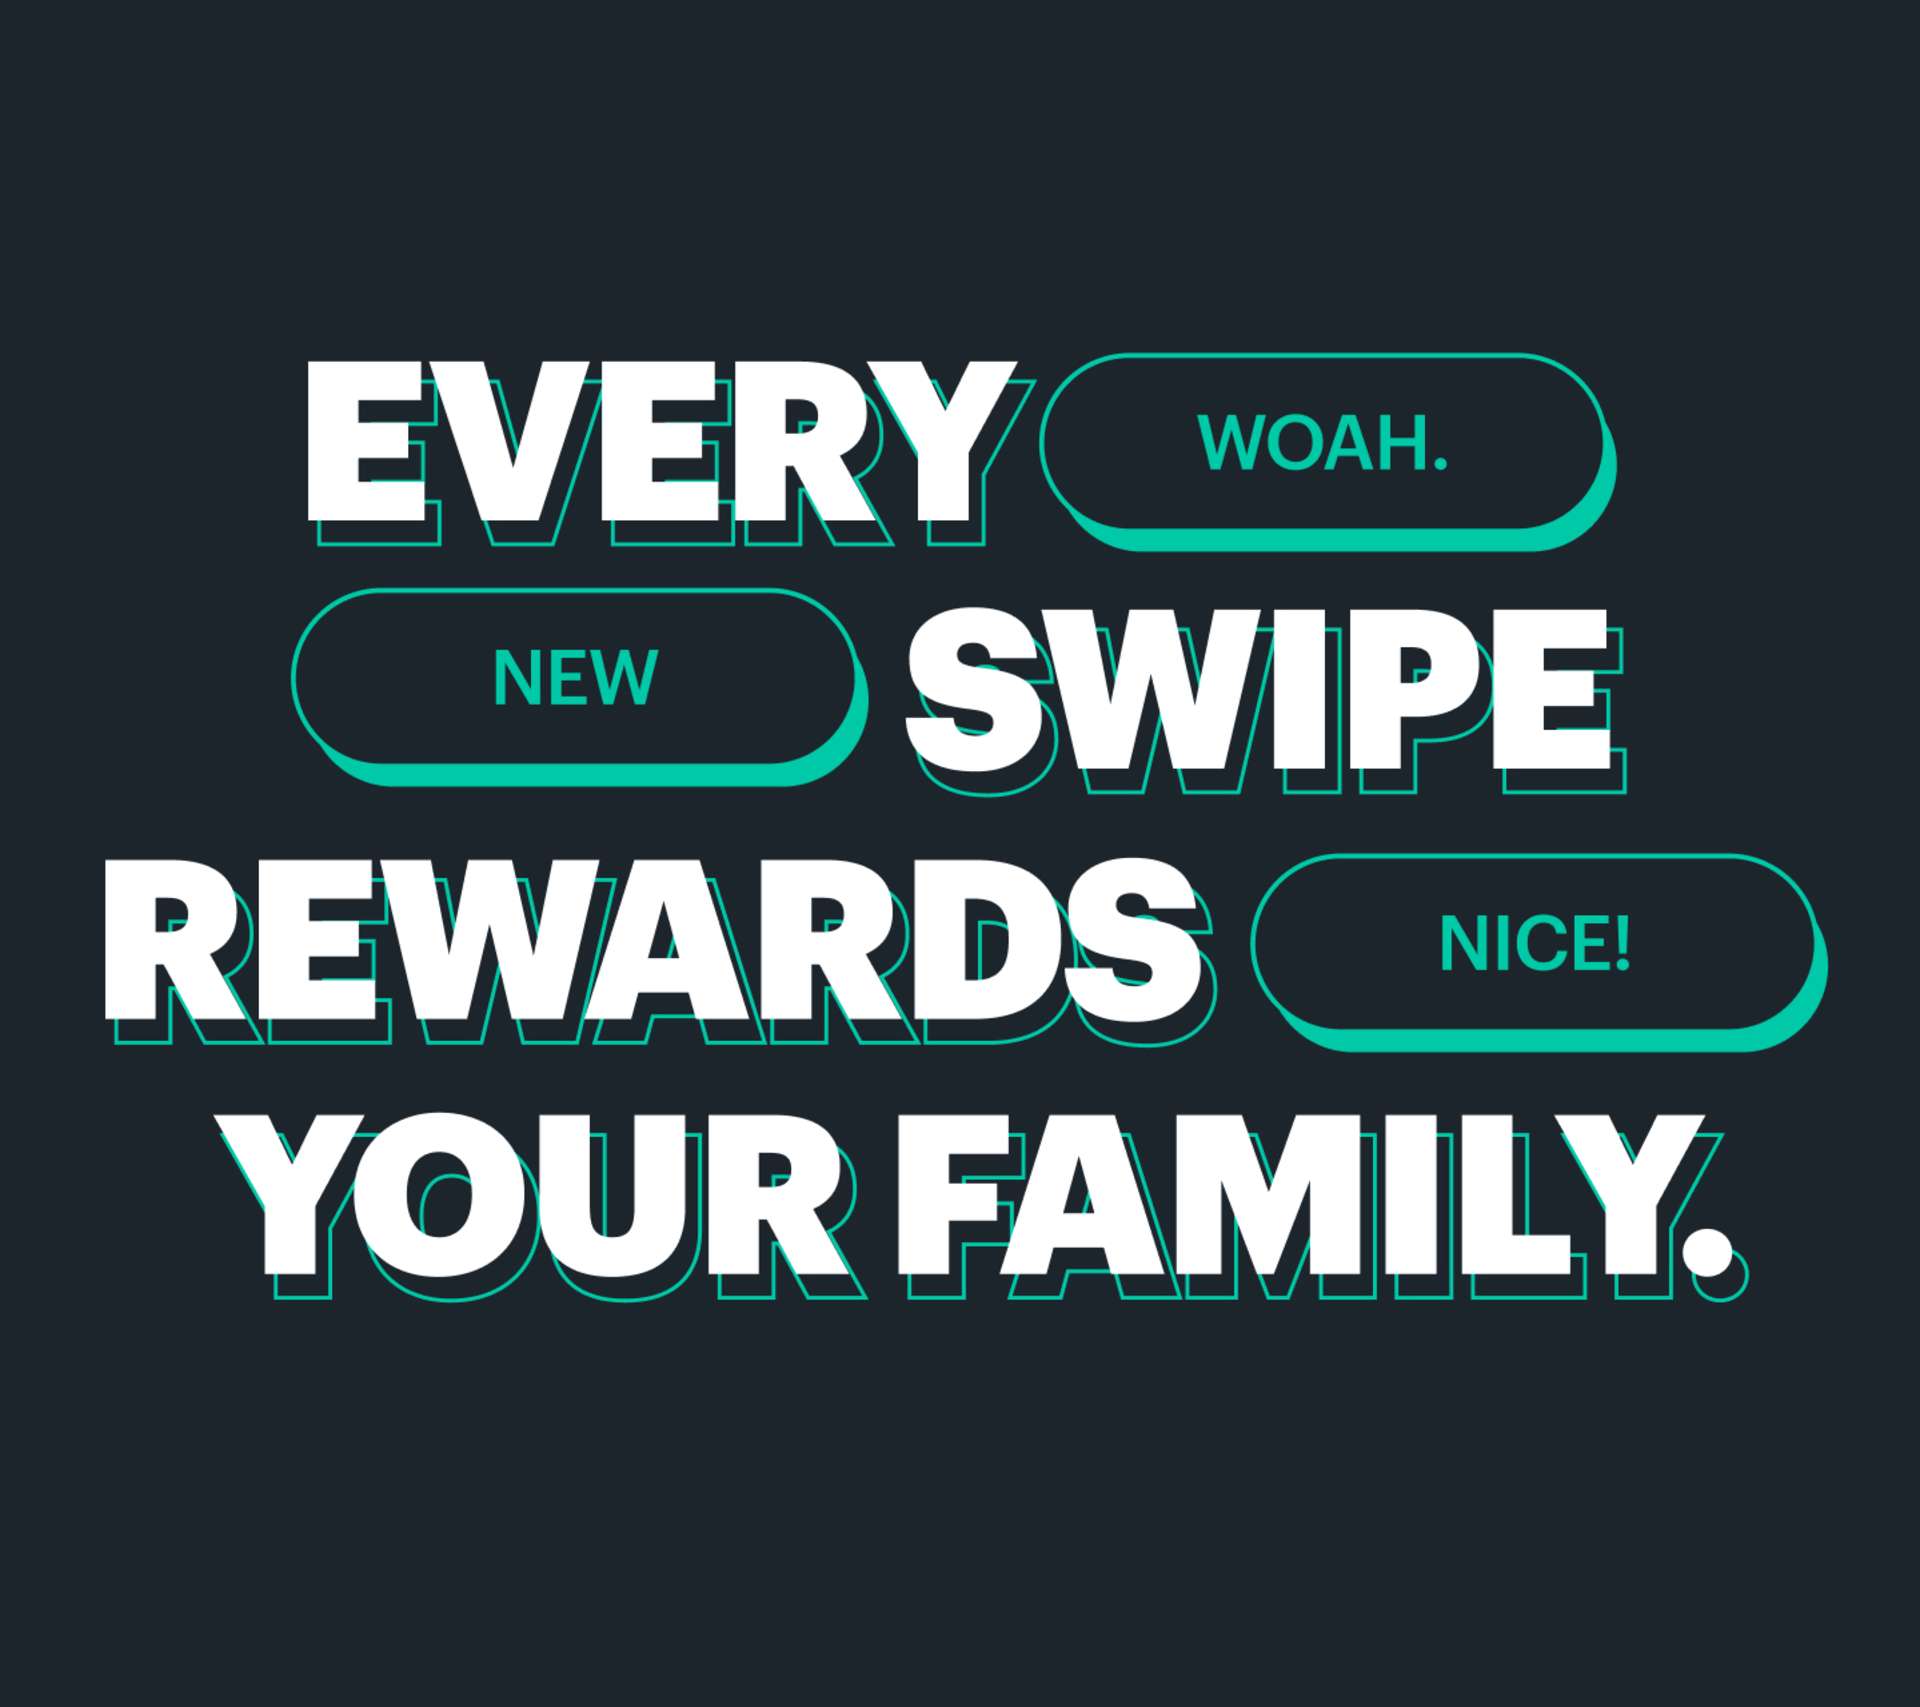 Family Cash Card illustration: Every swipe rewards your family